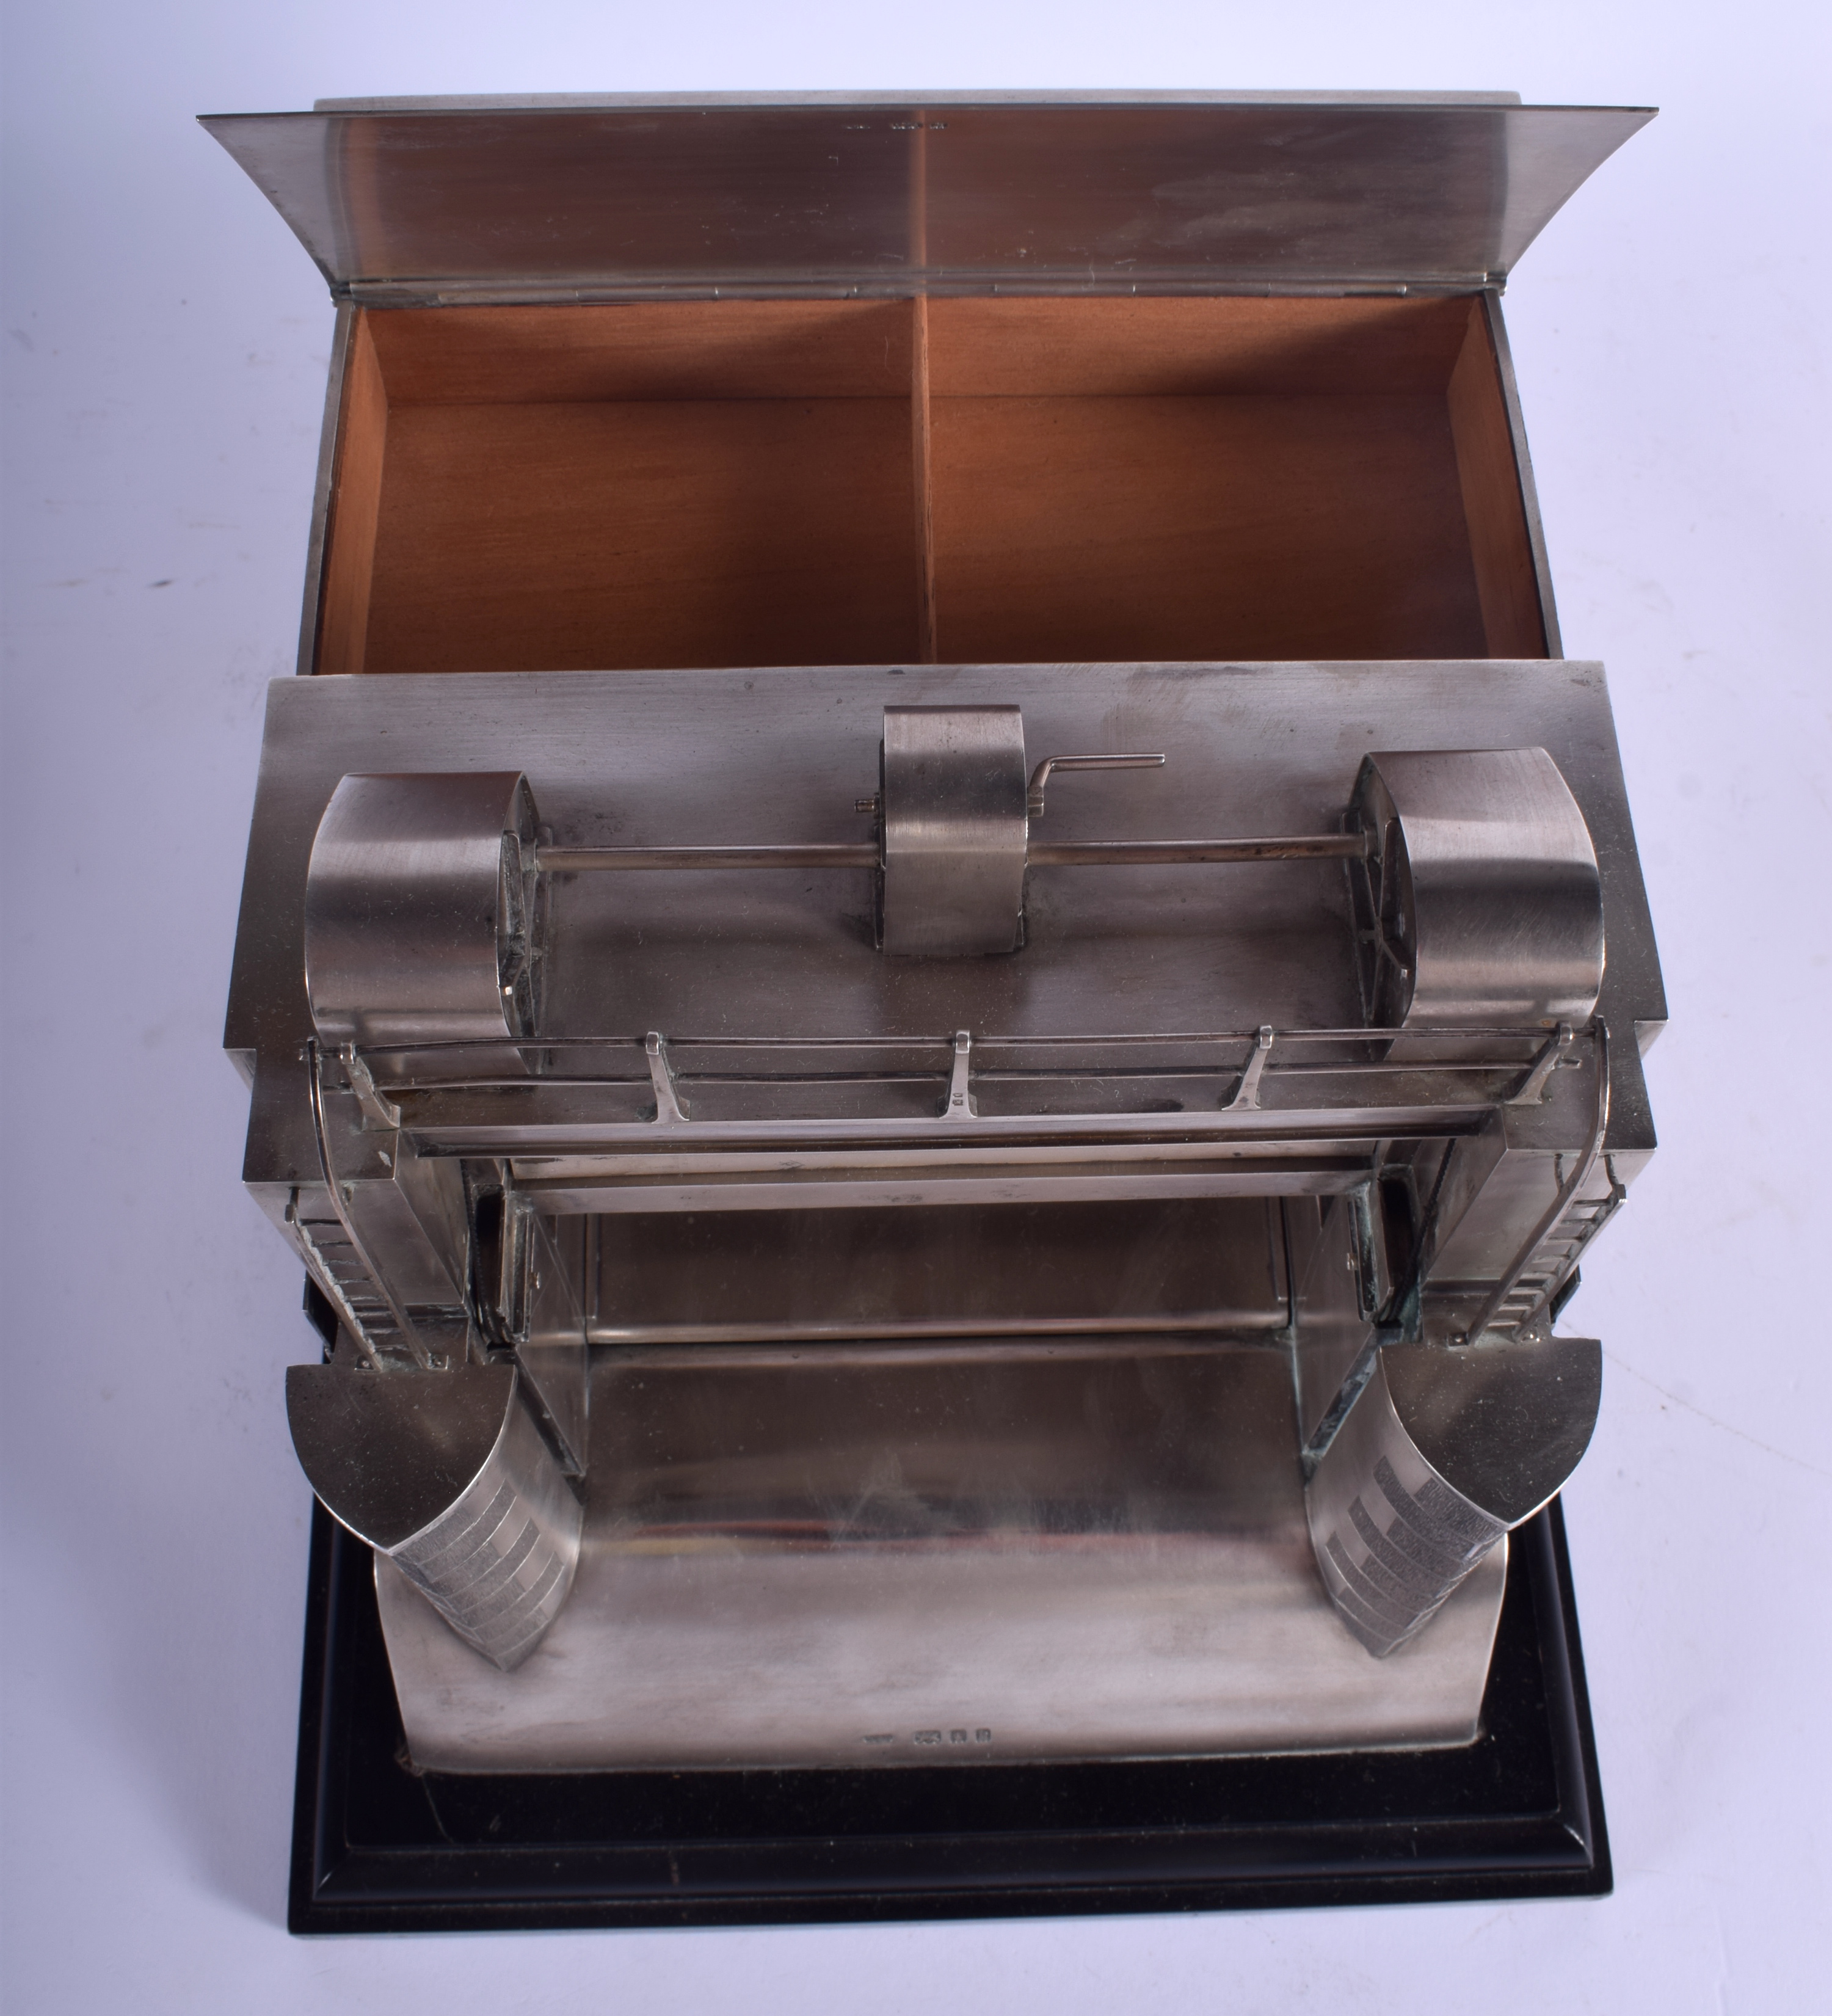 AN EXTREMELY RARE ENGLISH SILVER ART DECO MODEL OF THE SULEMANKI HEADWORKS by Wright & Davies (Willi - Image 7 of 7